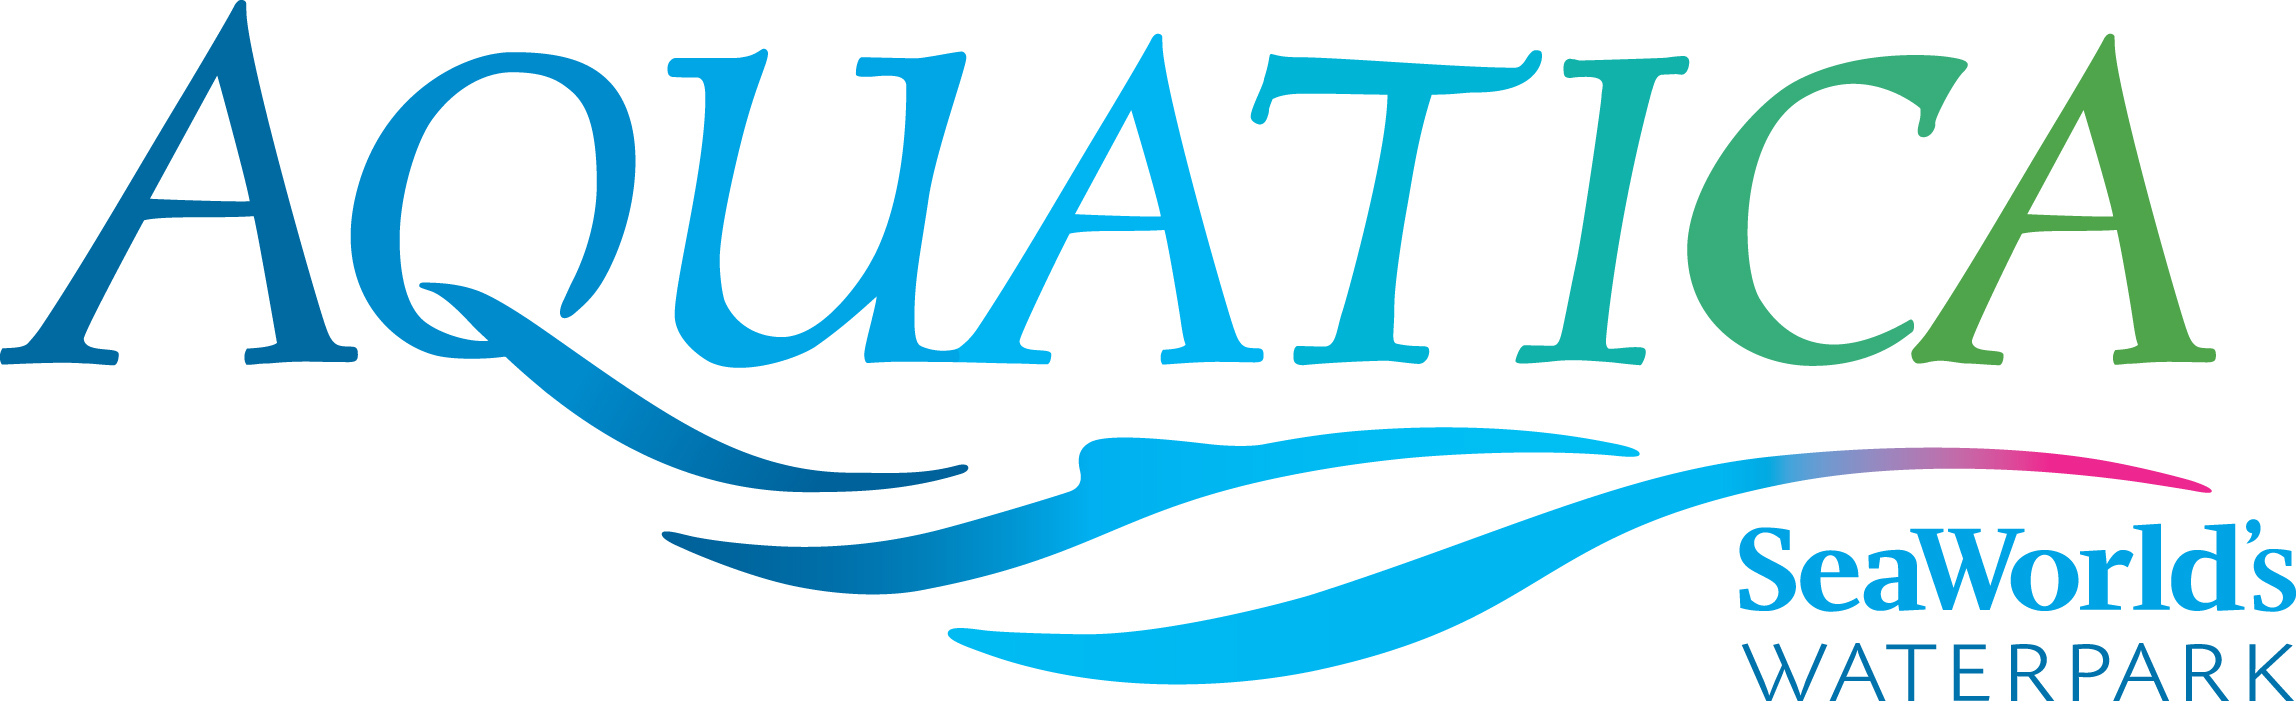 Get Aquatica tickets and group discounts with orlando group getaways.